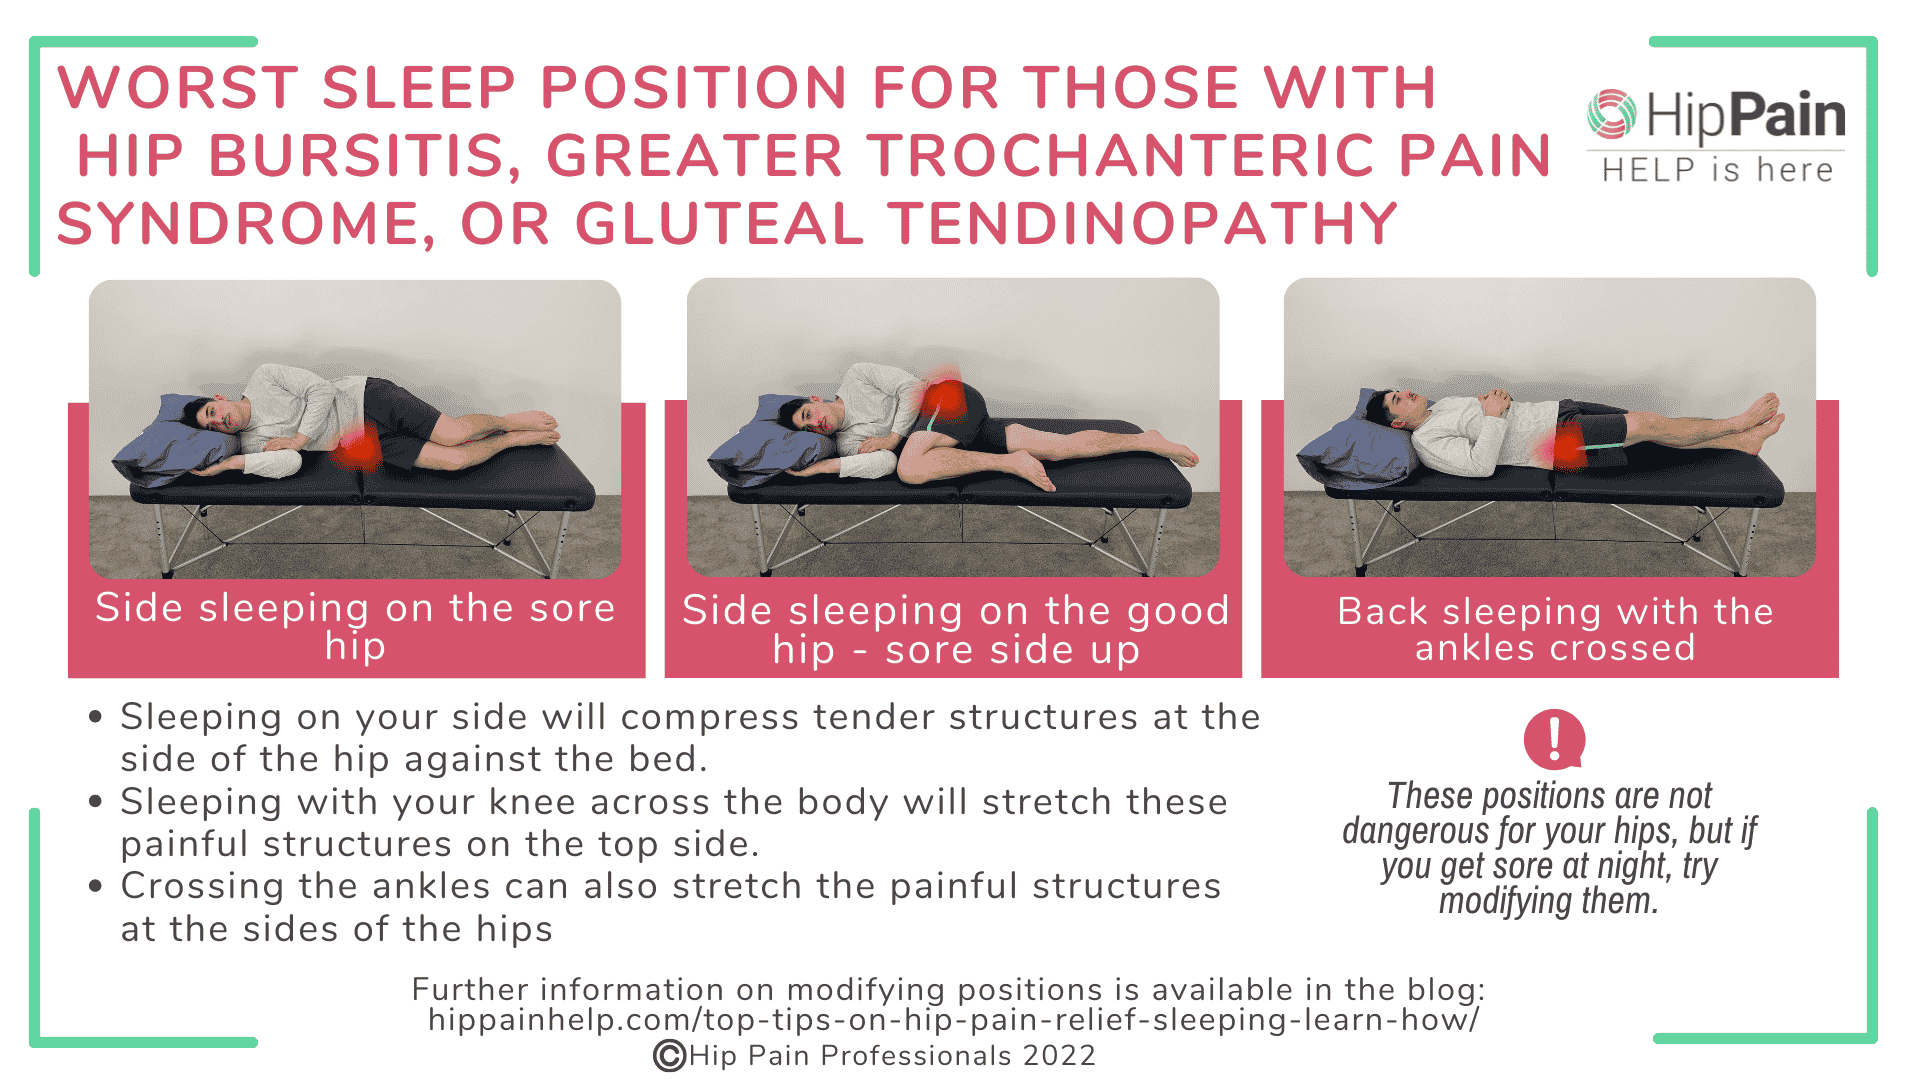 Hip Pain Help - Many people ask about how to side sleep with less